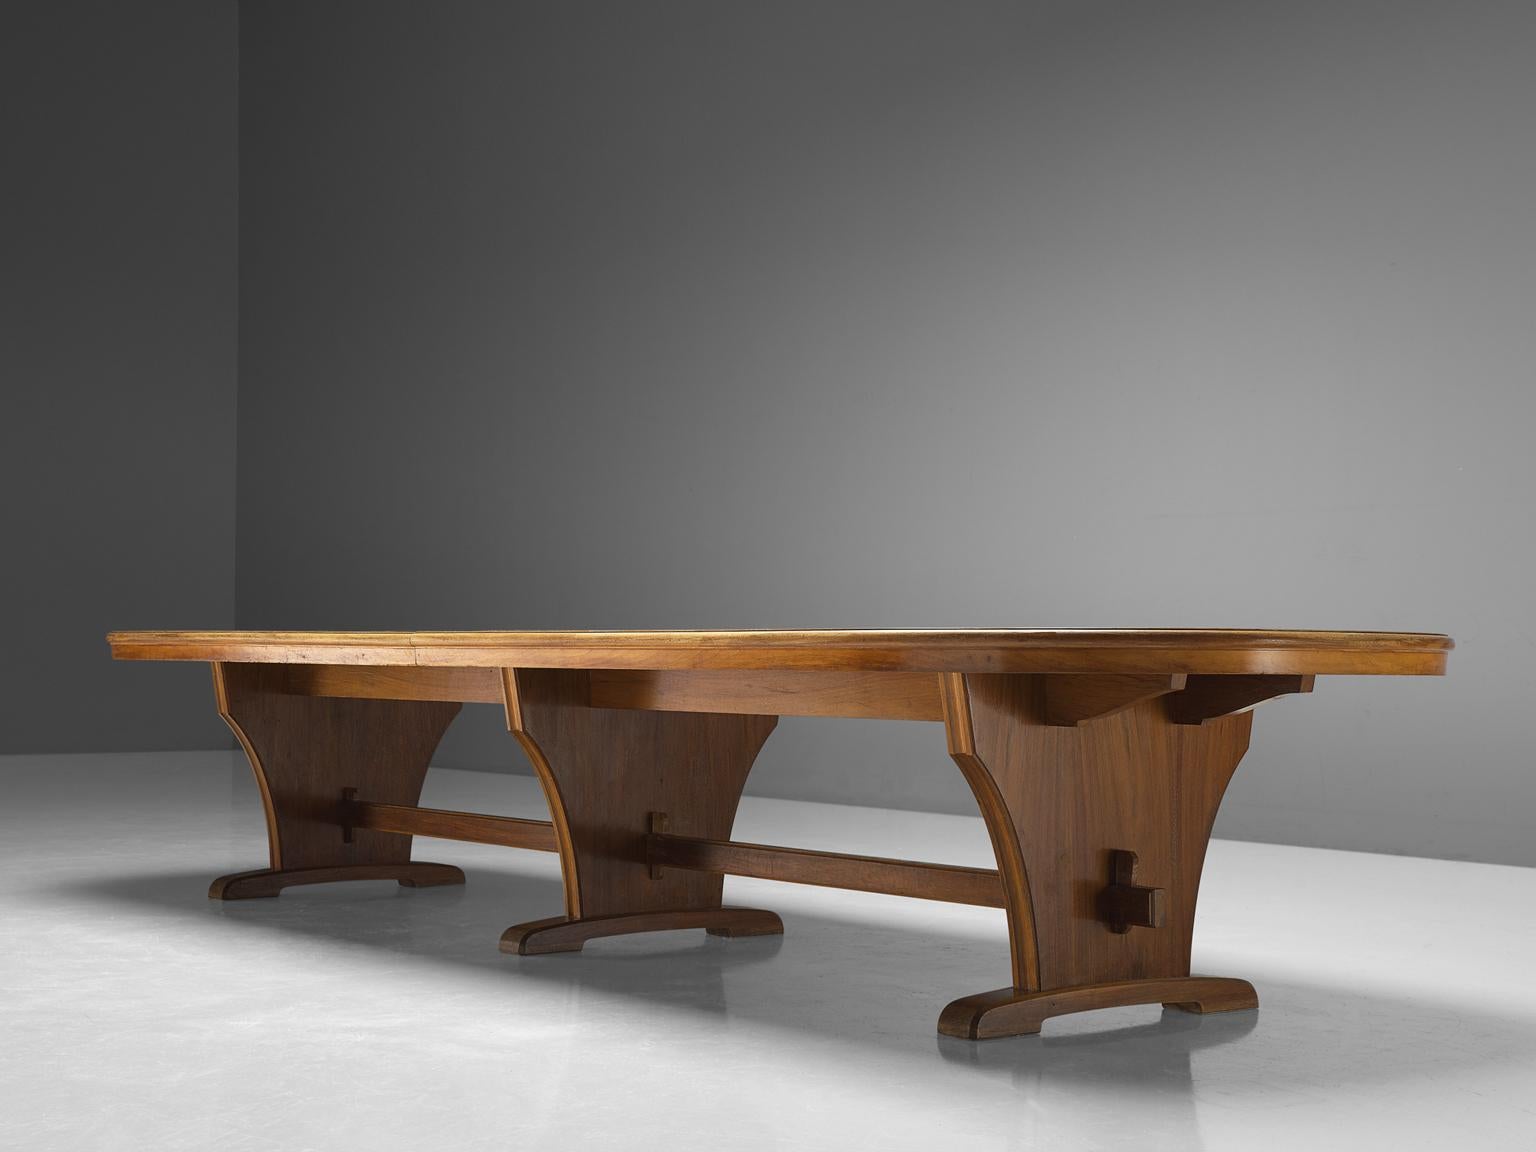 Conference table, veneered walnut, Germany, 1950s

Very large oval dining-/conference table with three, very elegant, legs. The wonderful mirrored grain of the bookmatched Italian walnut is beautifully framed with an inlays border in the same